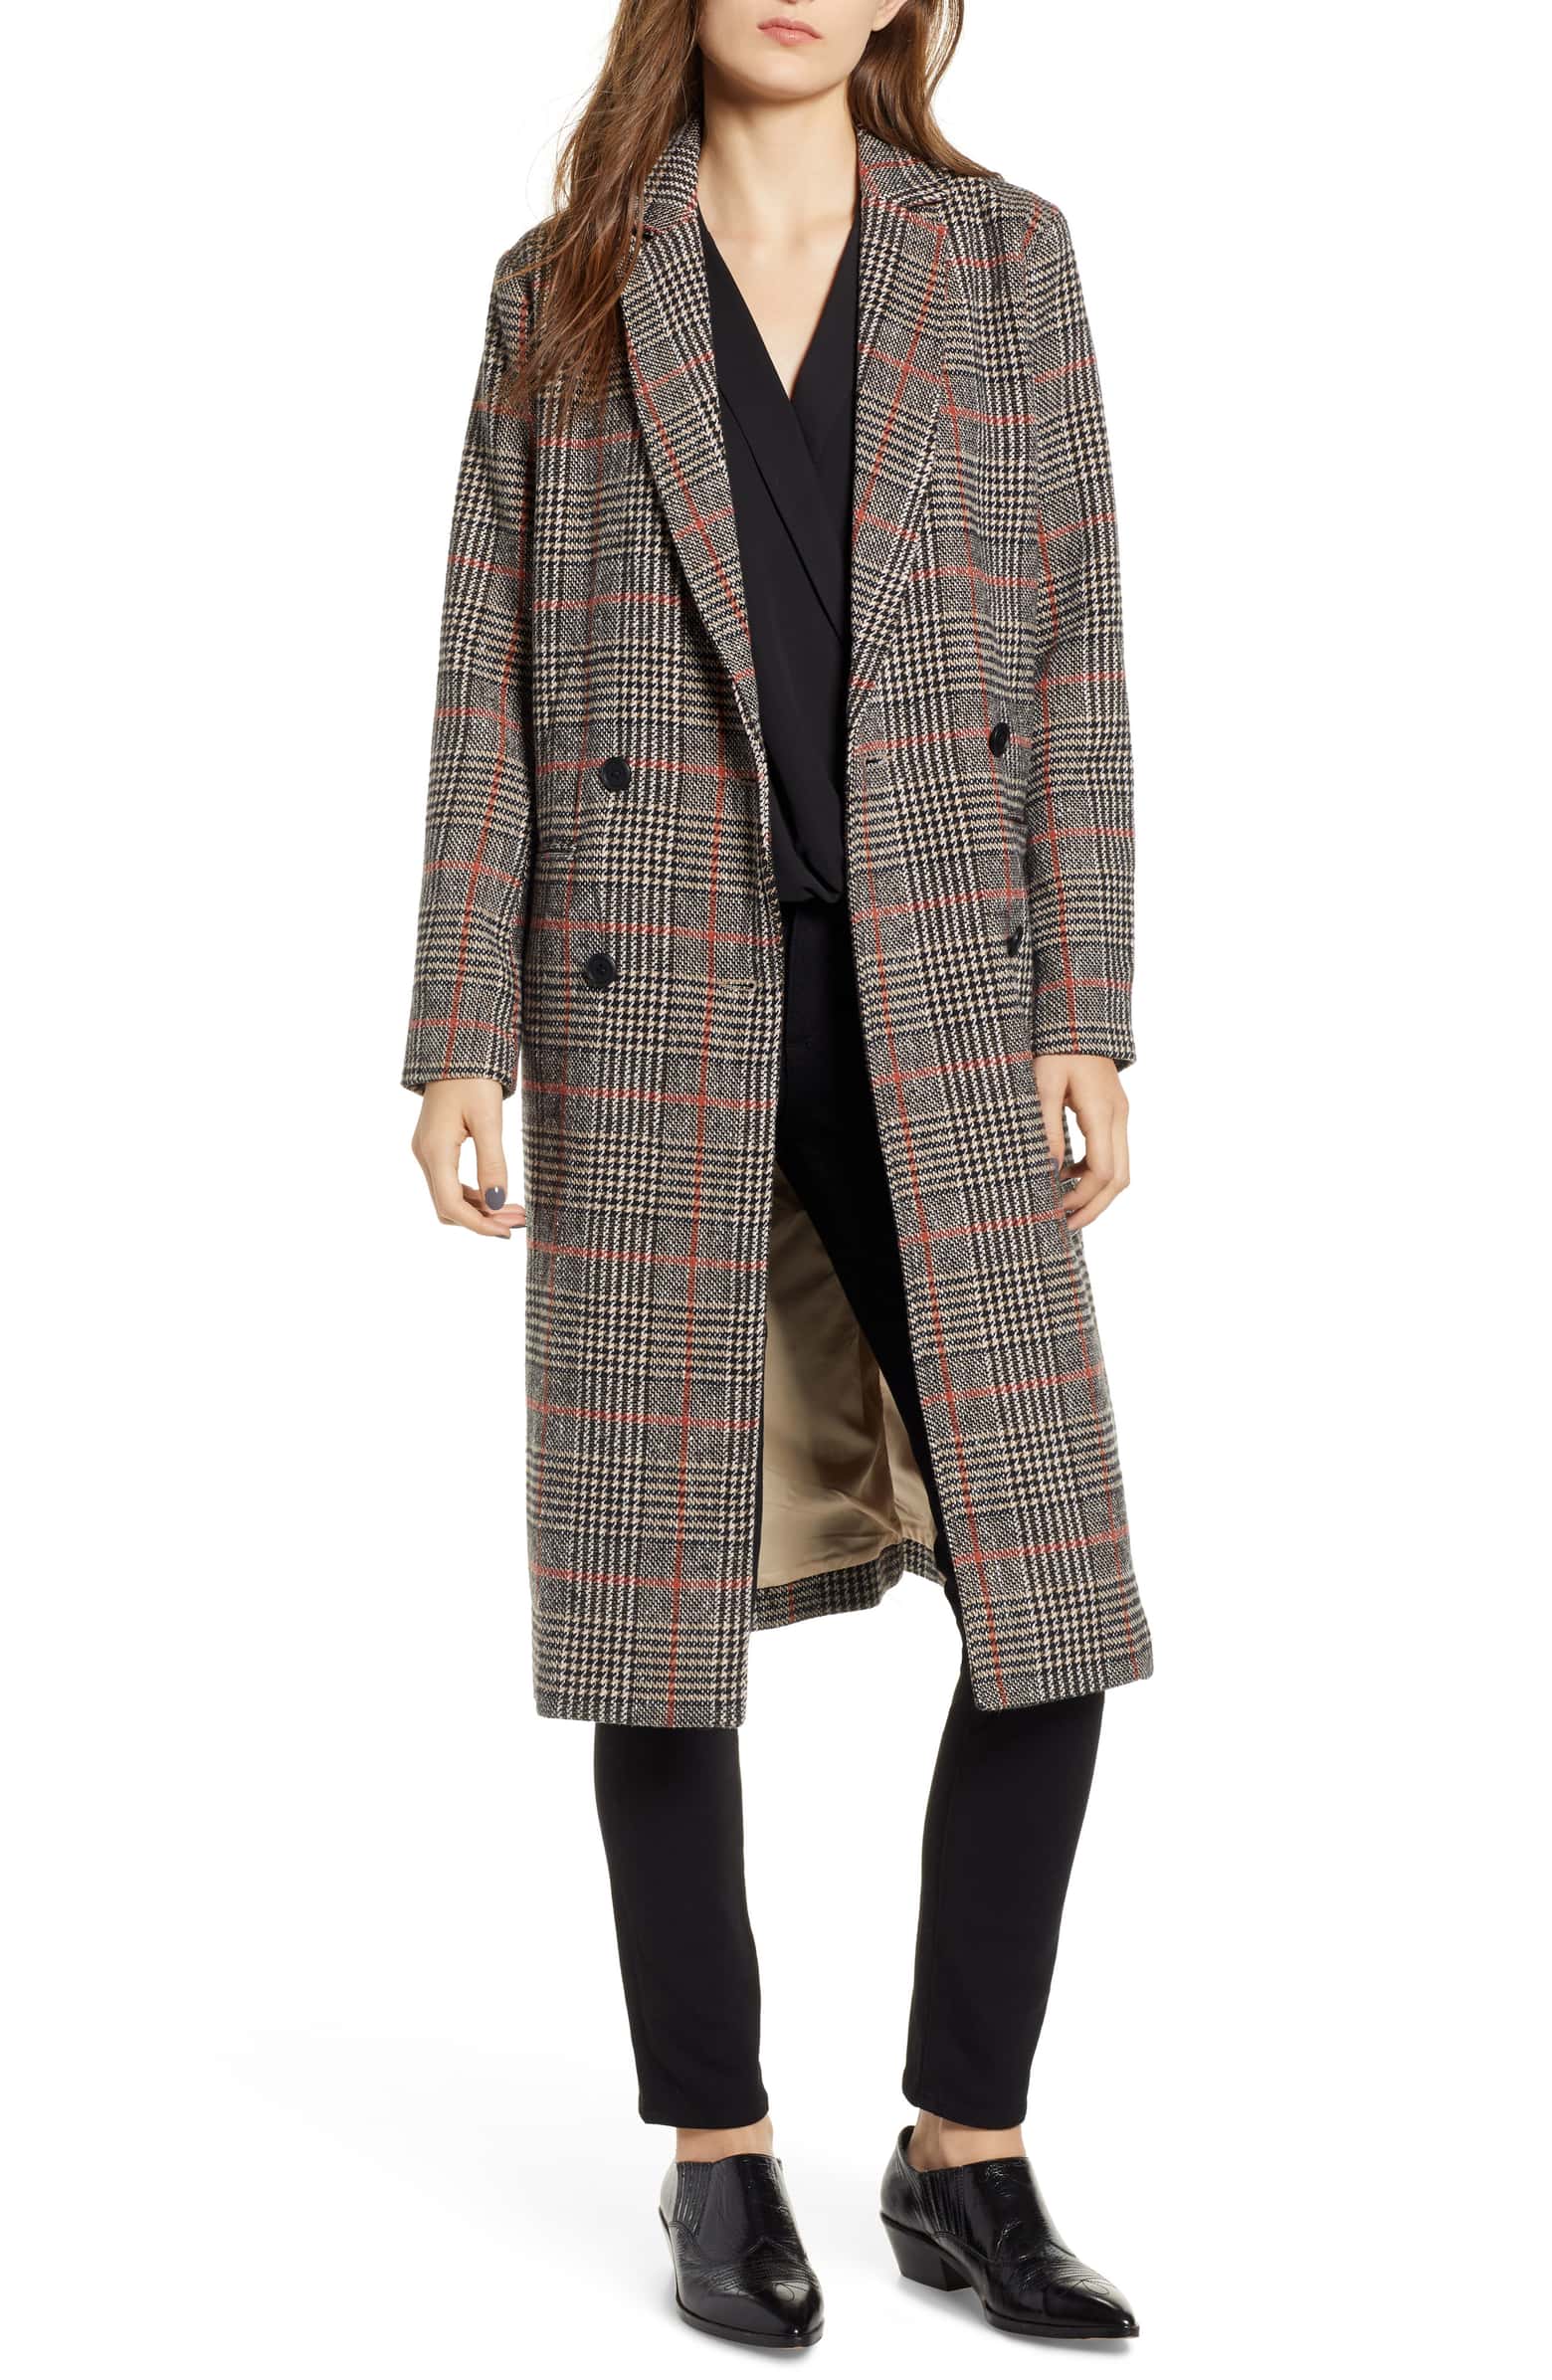 Cupcakes and Cashmere Plaid Duster Jacket $178